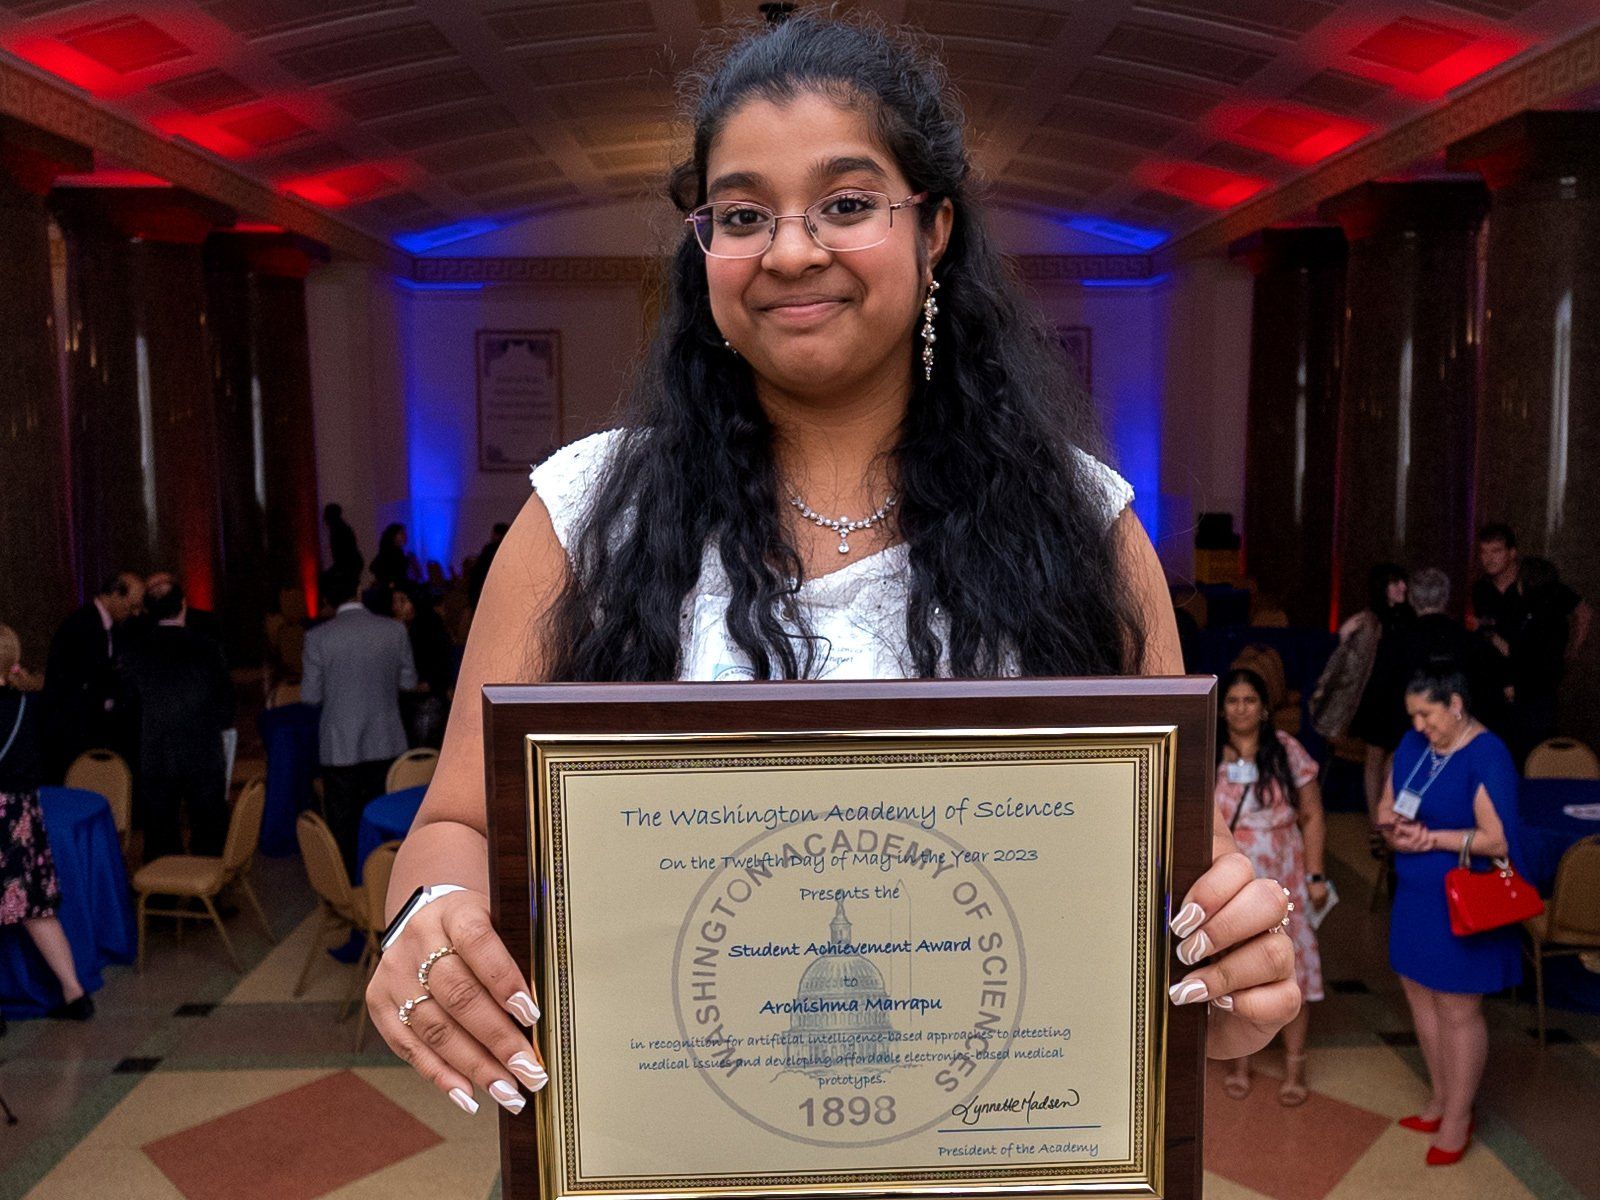 young woman smiling at camera holding a framed document with a large room filled with people in the background